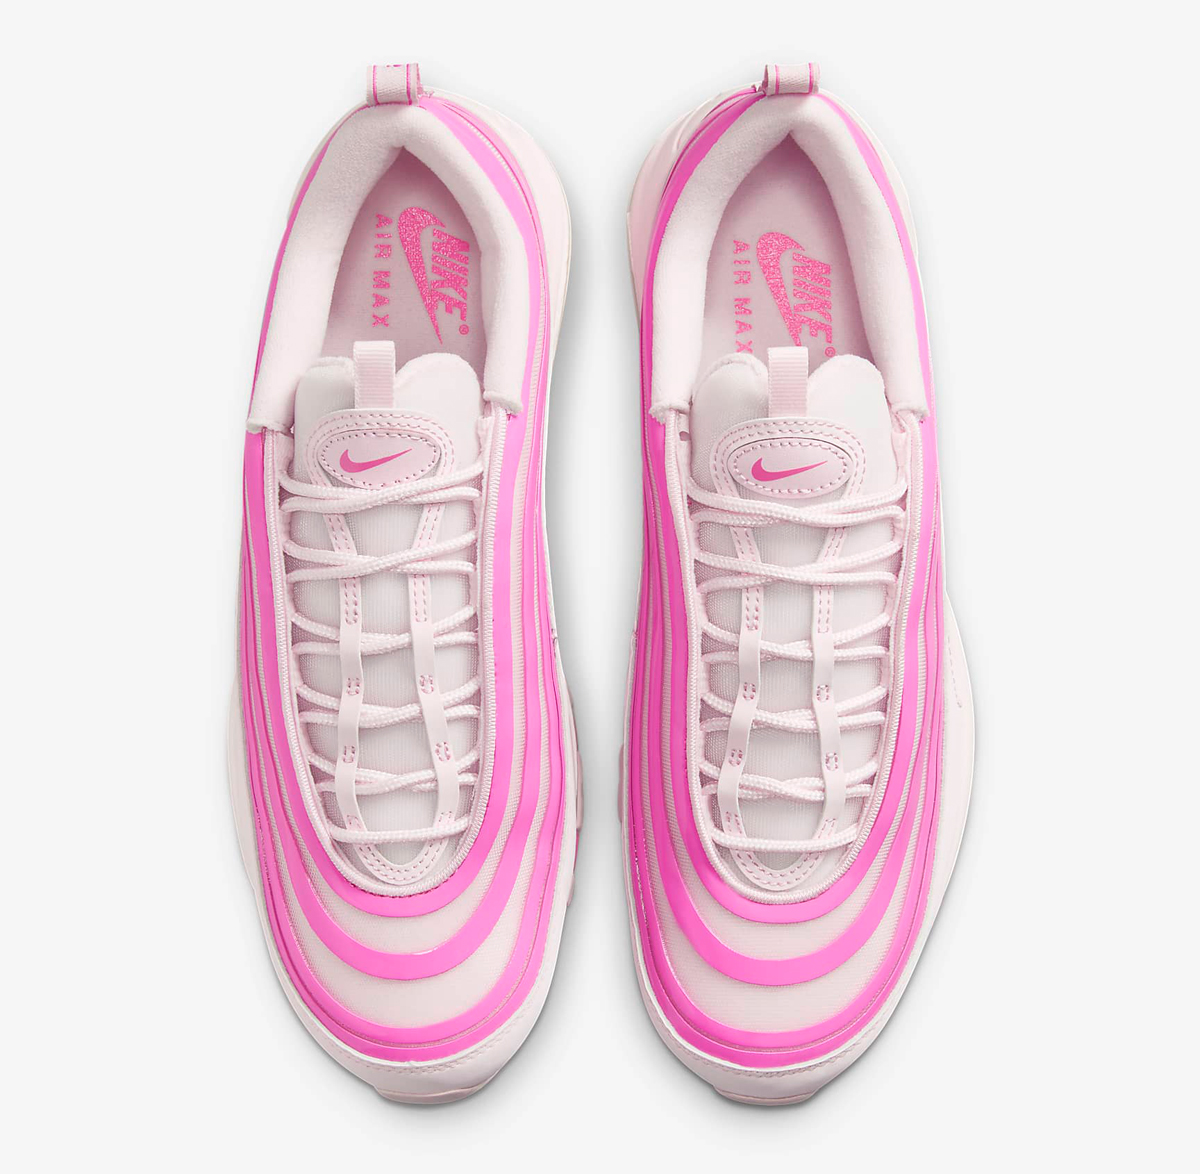 Nike Air Max 97 Pink Foam Playful Pink Release Date 4